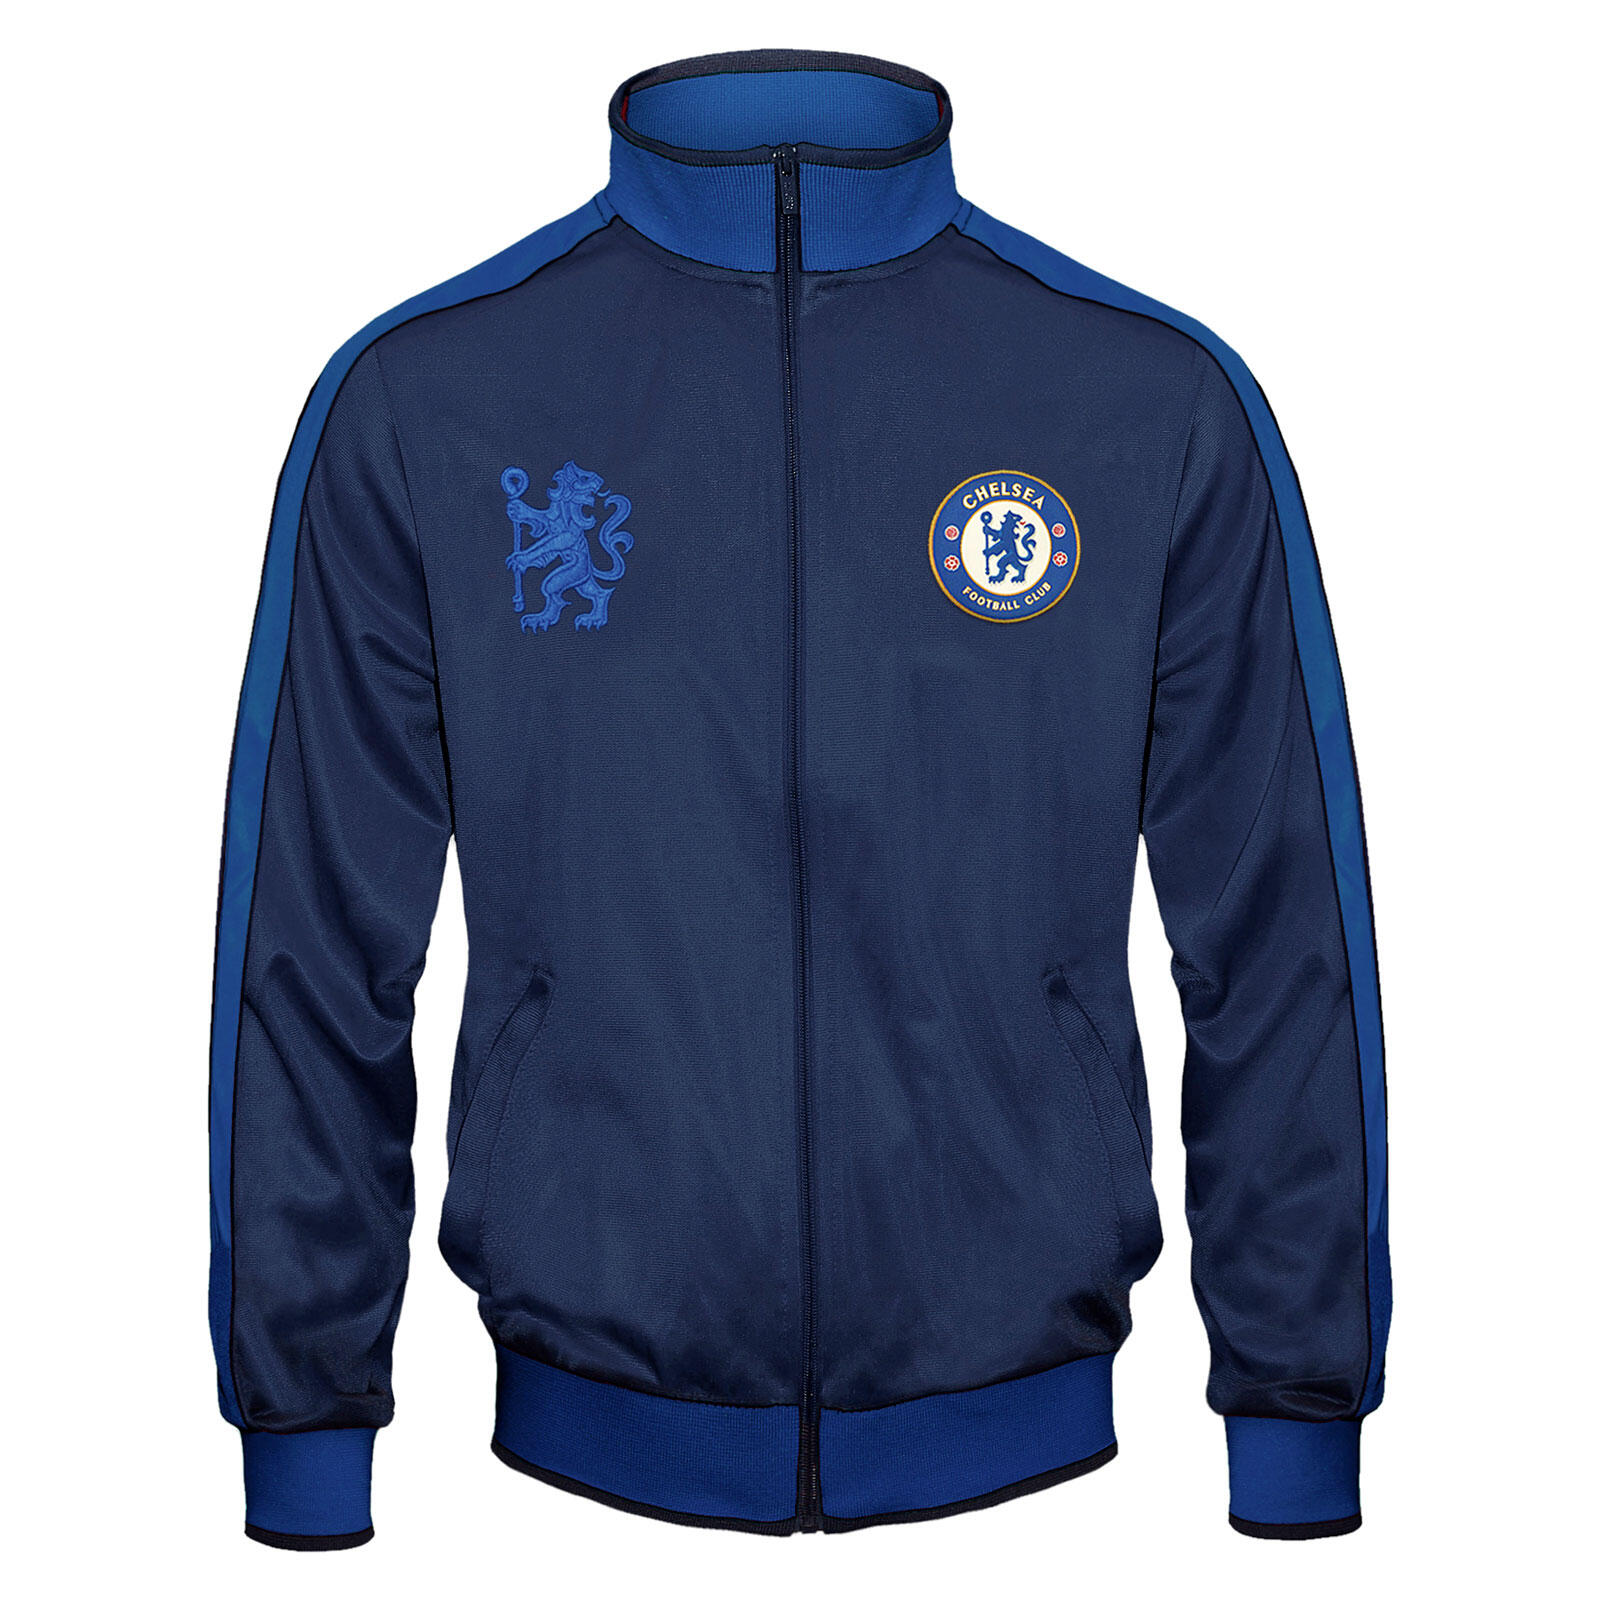 CHELSEA Chelsea FC Boys Jacket Track Top Retro Kids OFFICIAL Football Gift